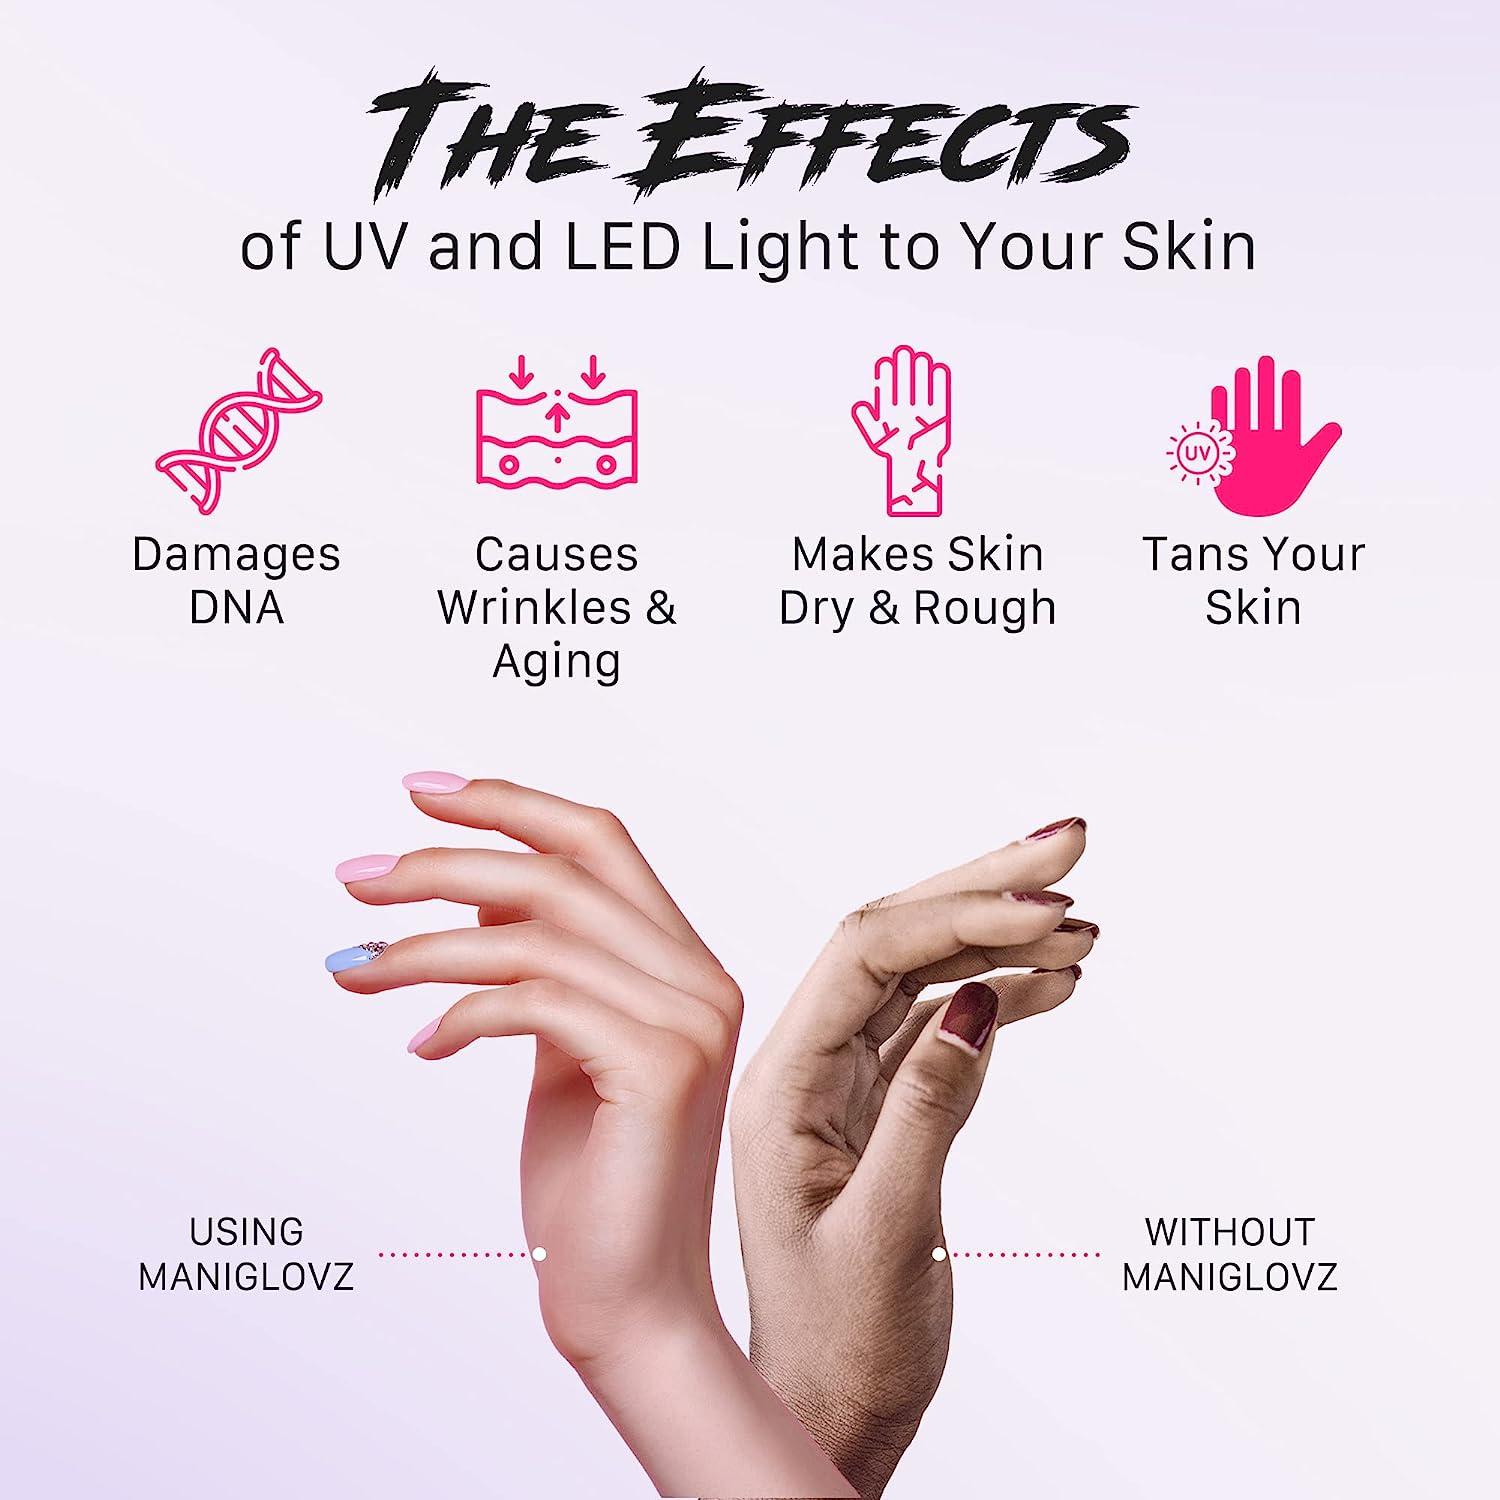 ManiGlovz - The ORIGINAL UPF 50+ UV Light Protective Nail Gloves | Gel  Manicure Gloves and Anti UV Fingerless Gloves for Women | Can be Used as  Sun